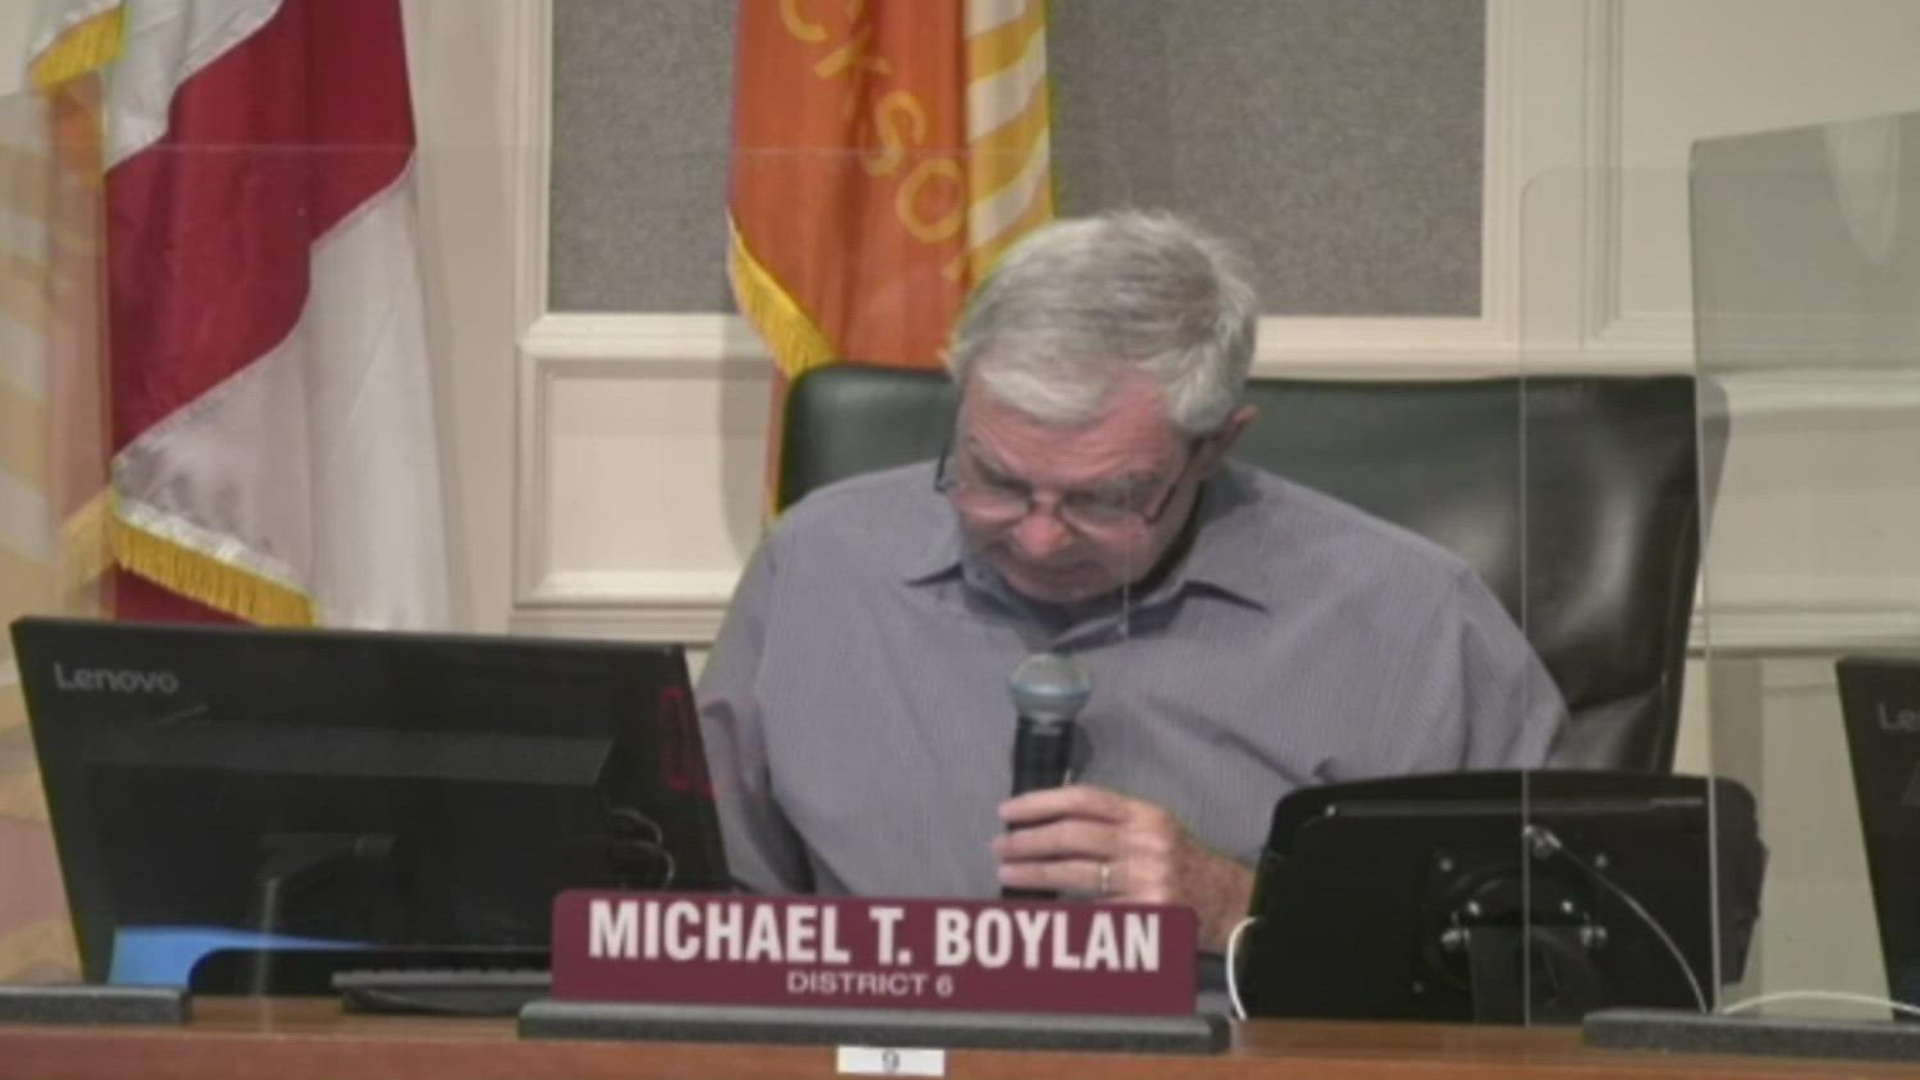 Michael Boylan said the original goal of the committee was compromised following the latest meeting. Joyce Morgan says she is still dedicated to the committee.